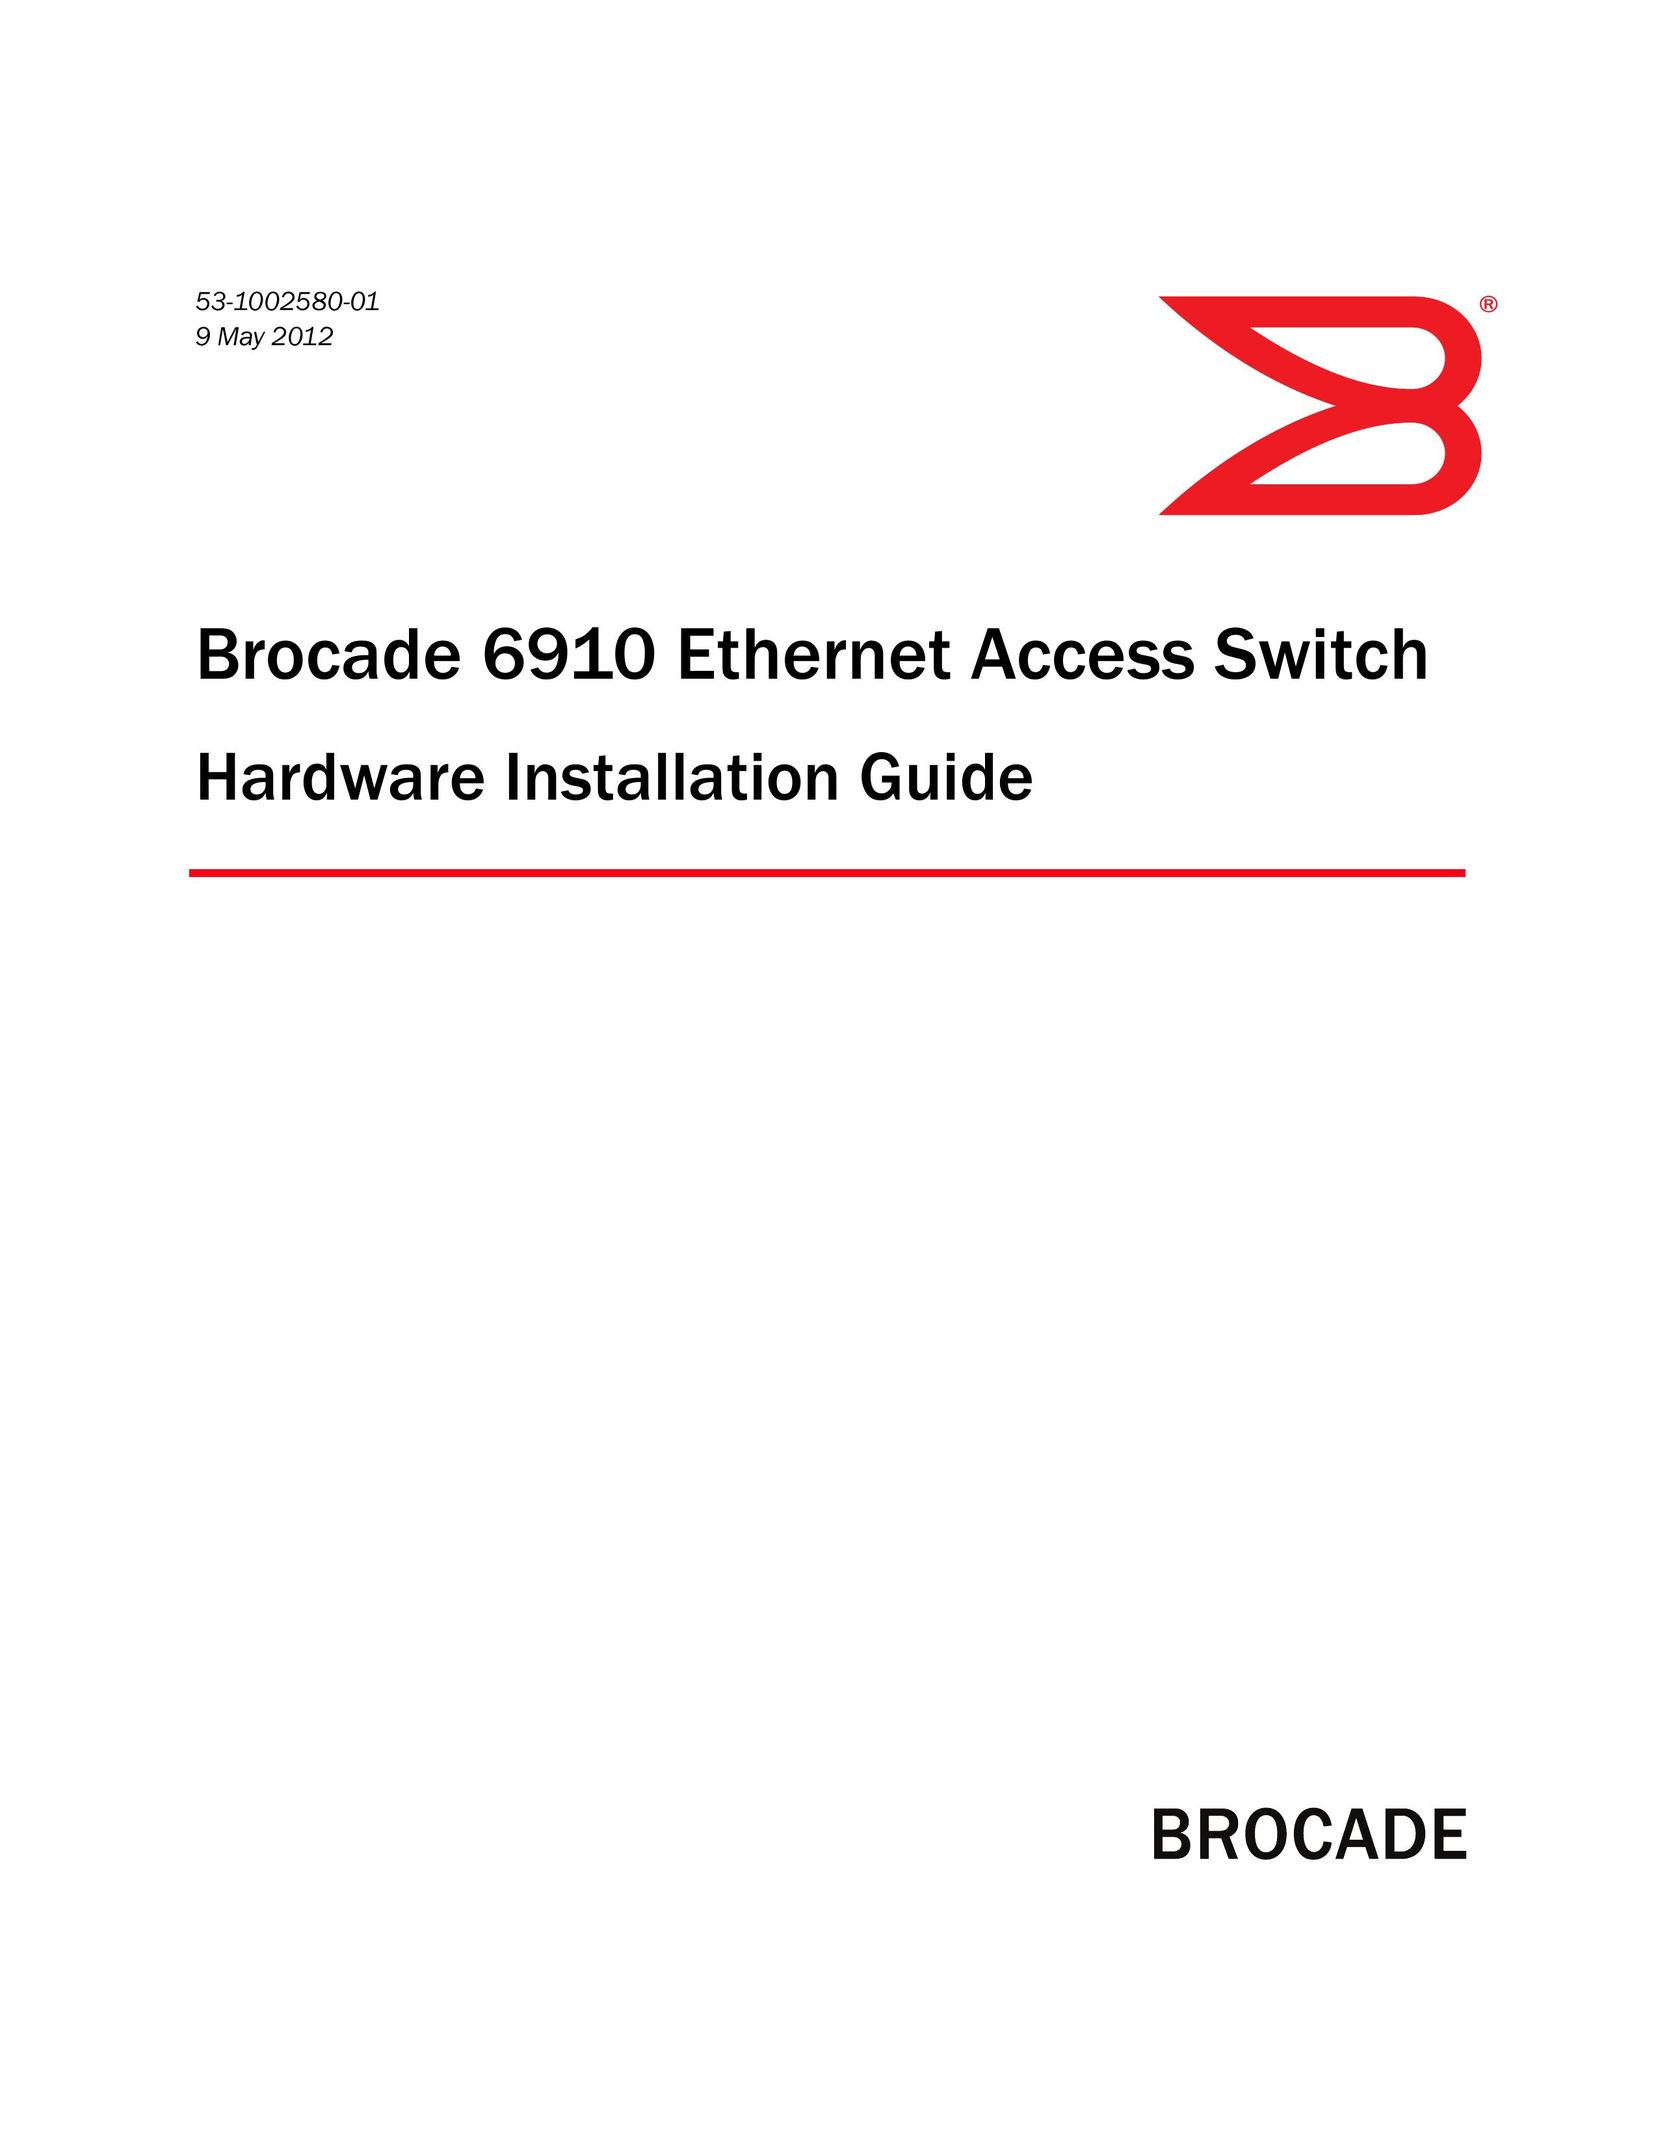 Brocade Communications Systems 53-1002580-01 Switch User Manual